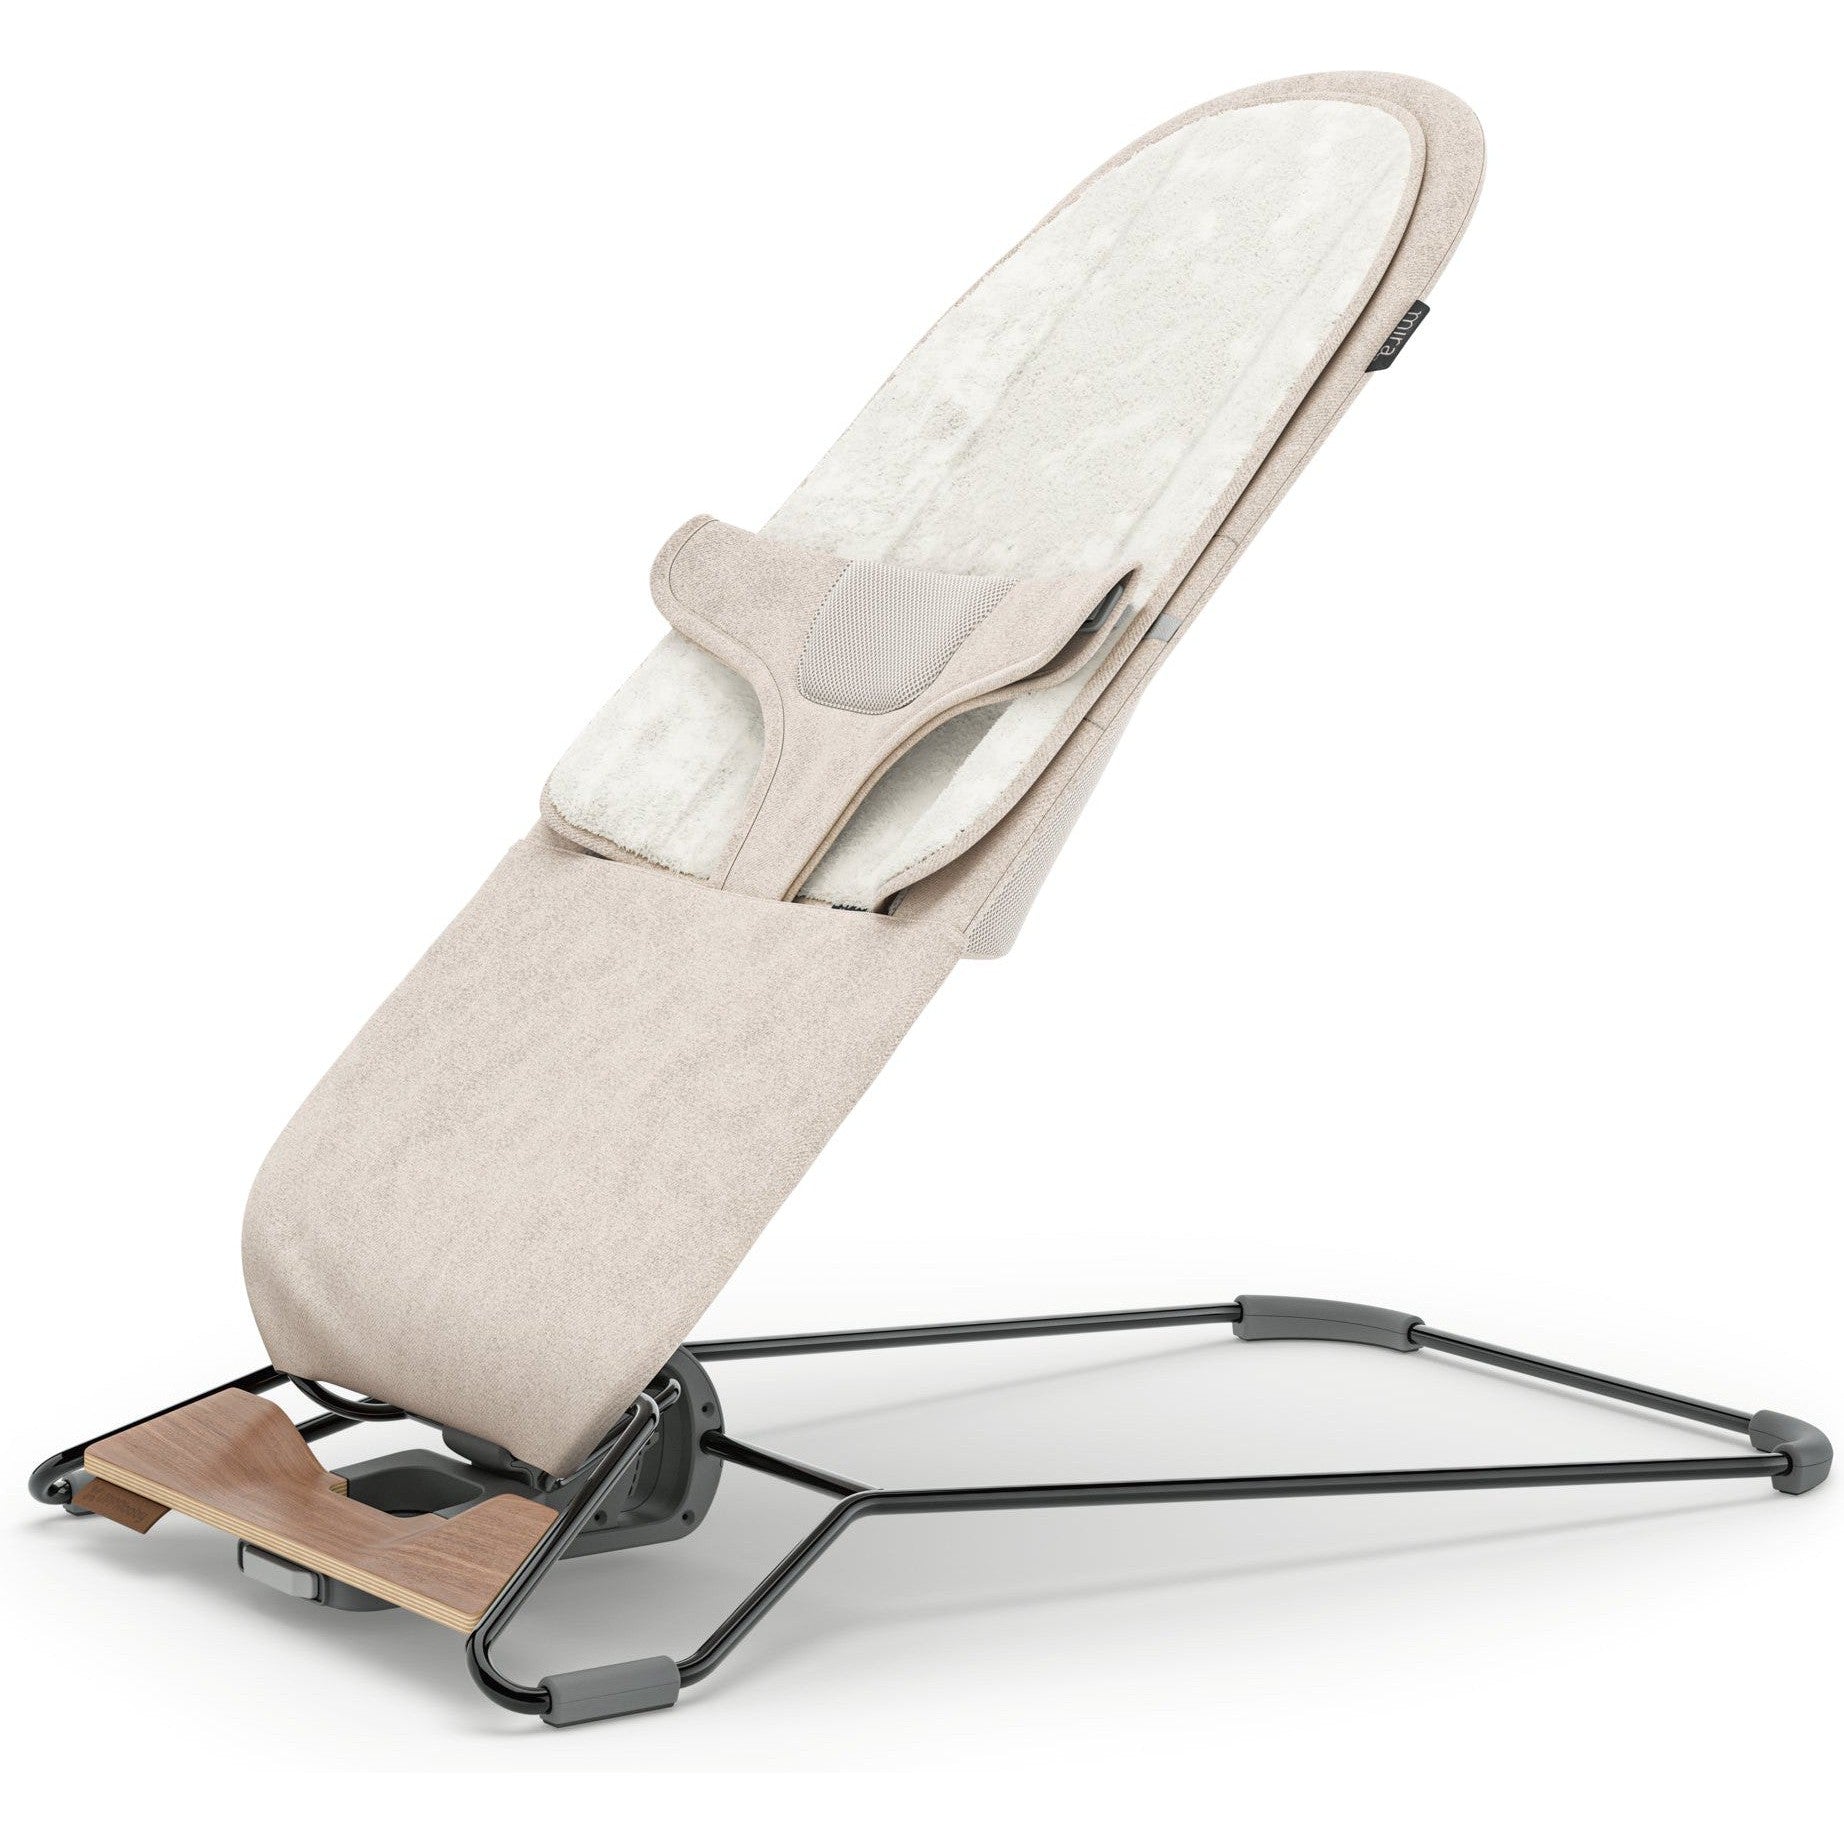 UPPAbaby Mira 2-in-1 Bouncer & Seat - 0